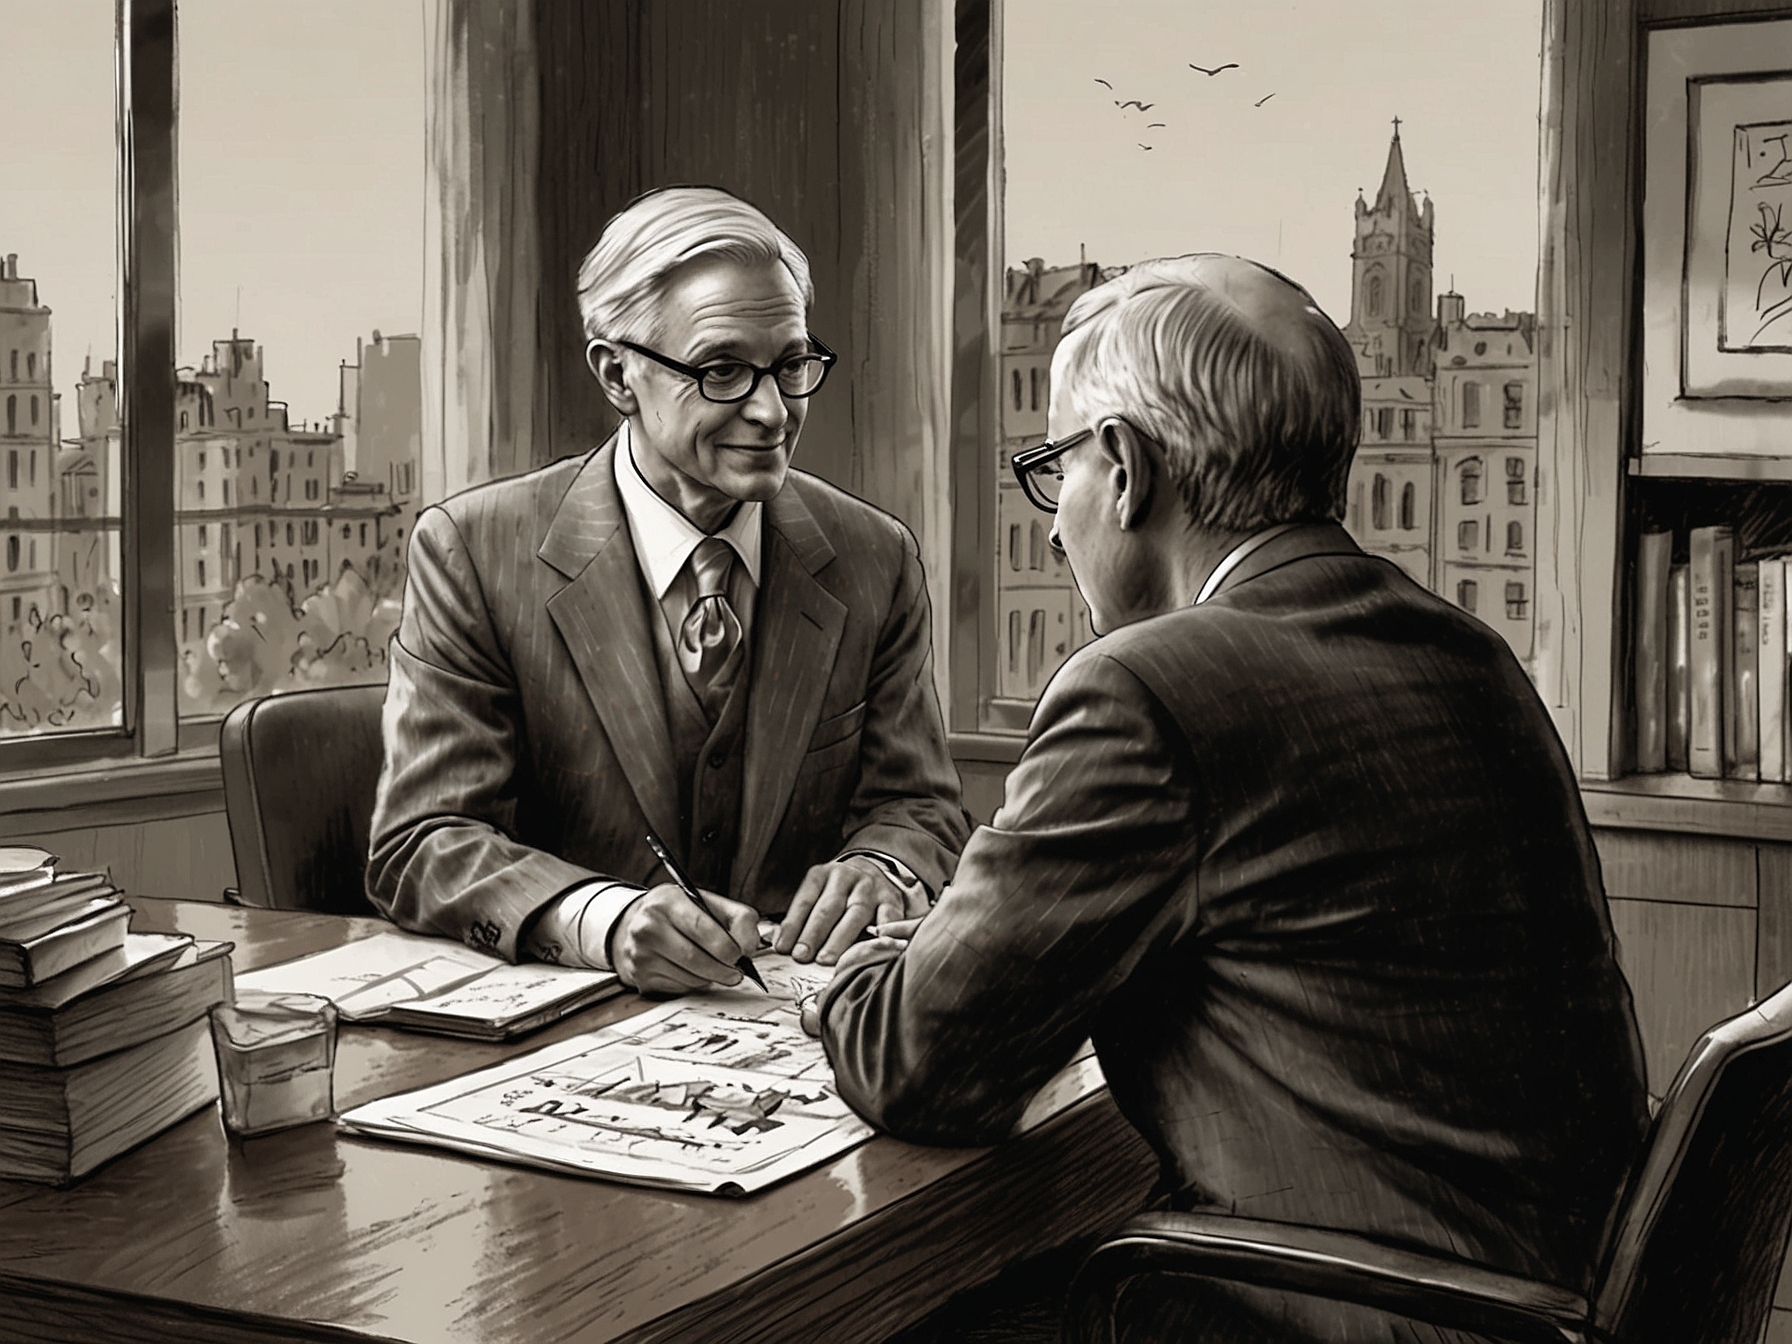 A person meeting with a certified financial planner, underscoring the importance of seeking professional advice tailored to individual financial circumstances for a secure retirement.